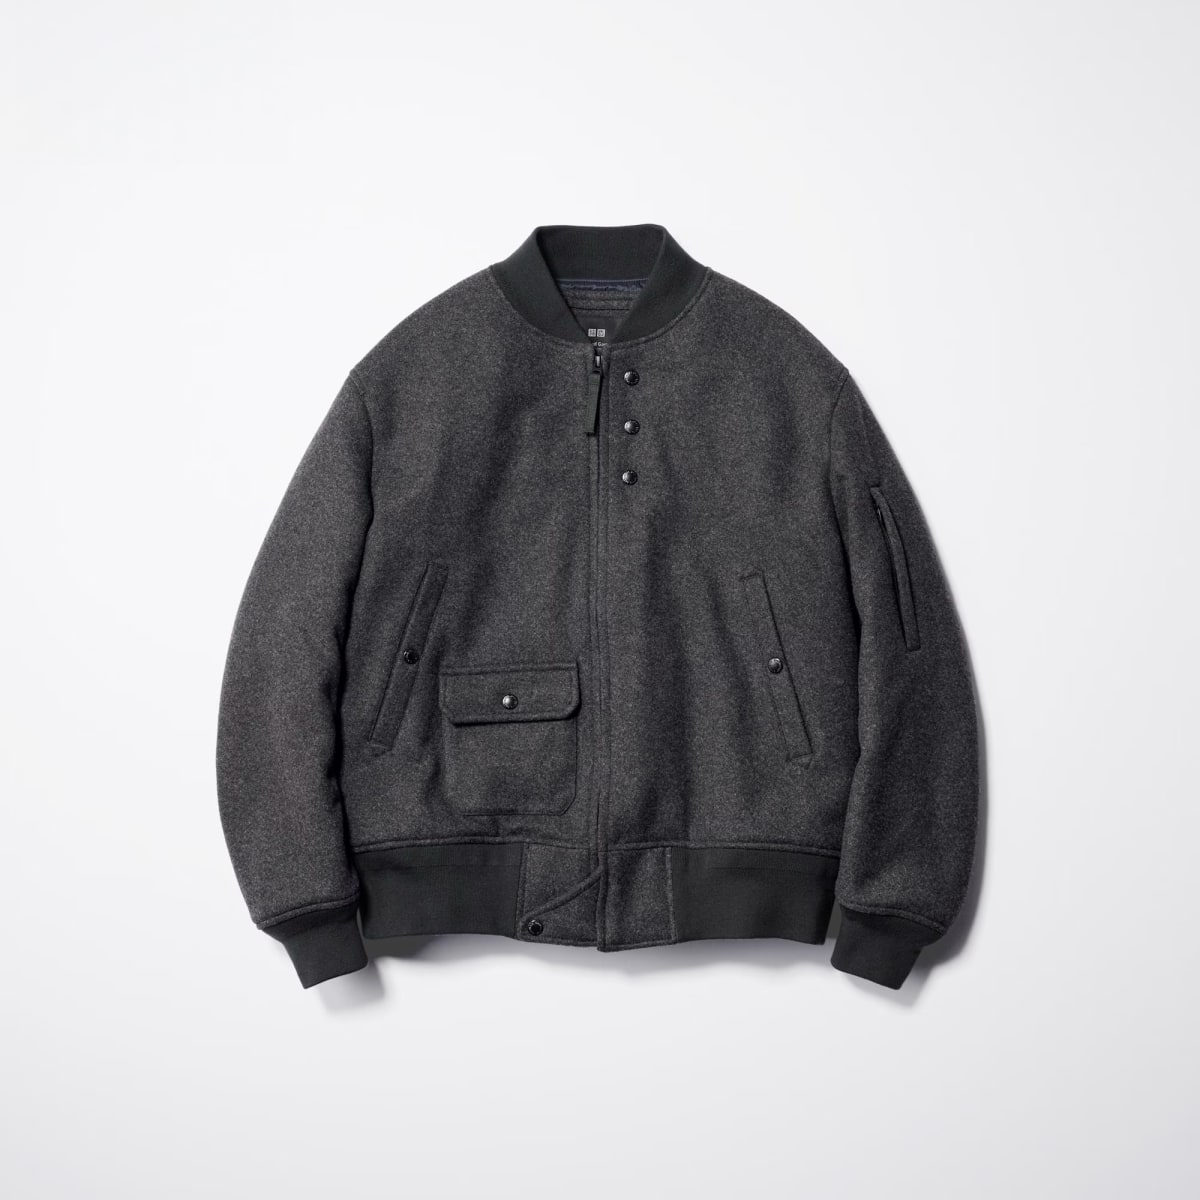 Uniqlo and Engineered Garments launch a collection of PUFFTECH